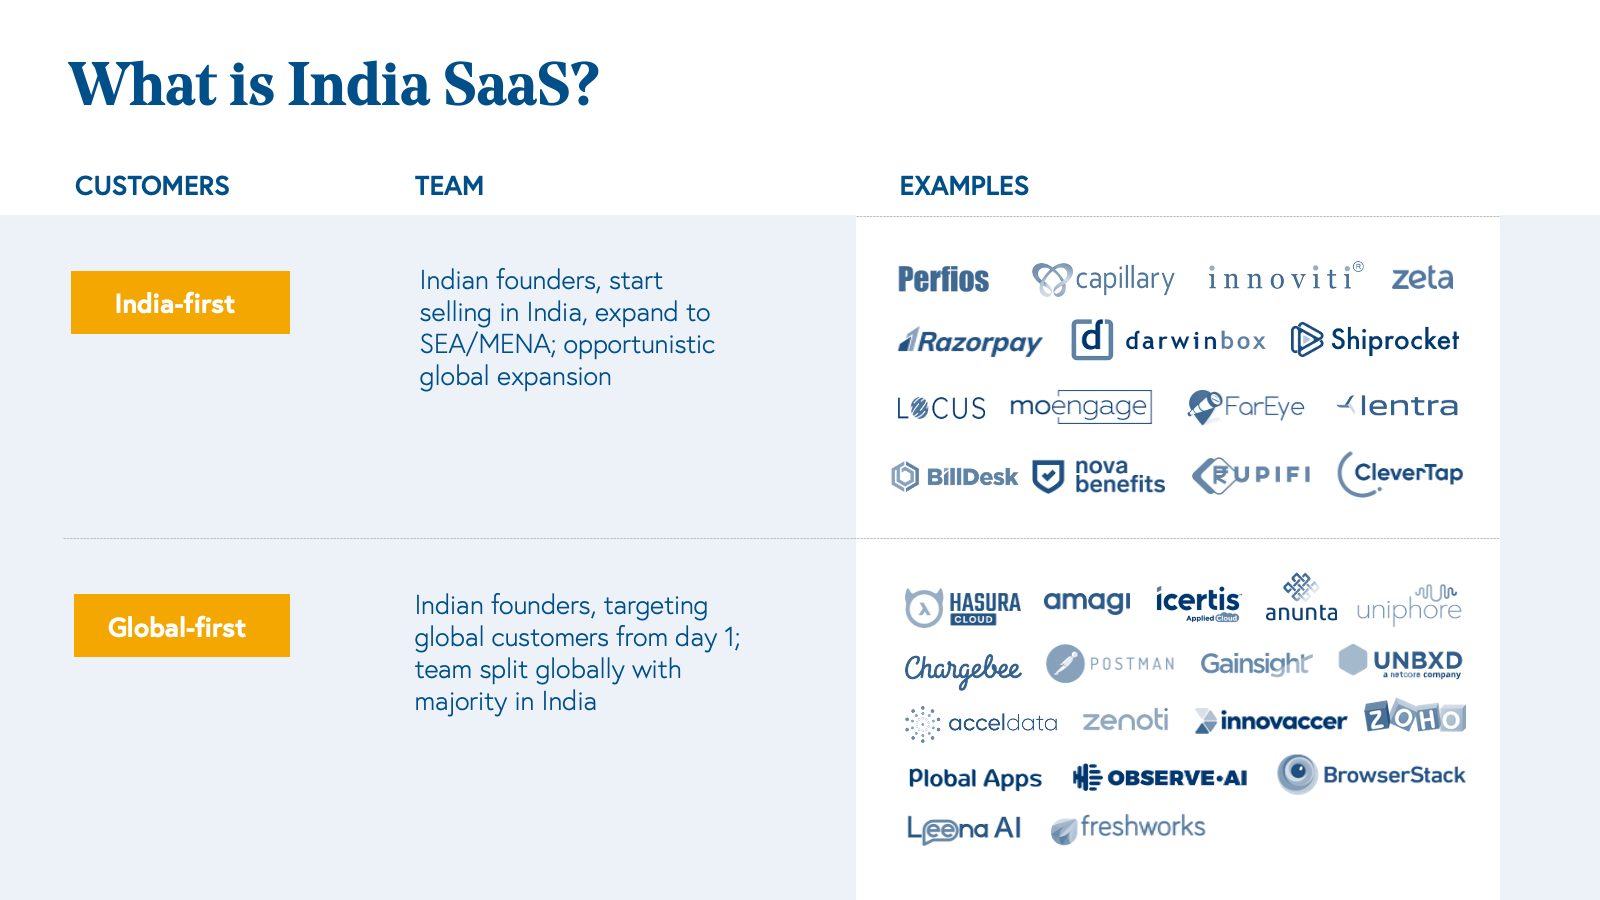 What is India SaaS?